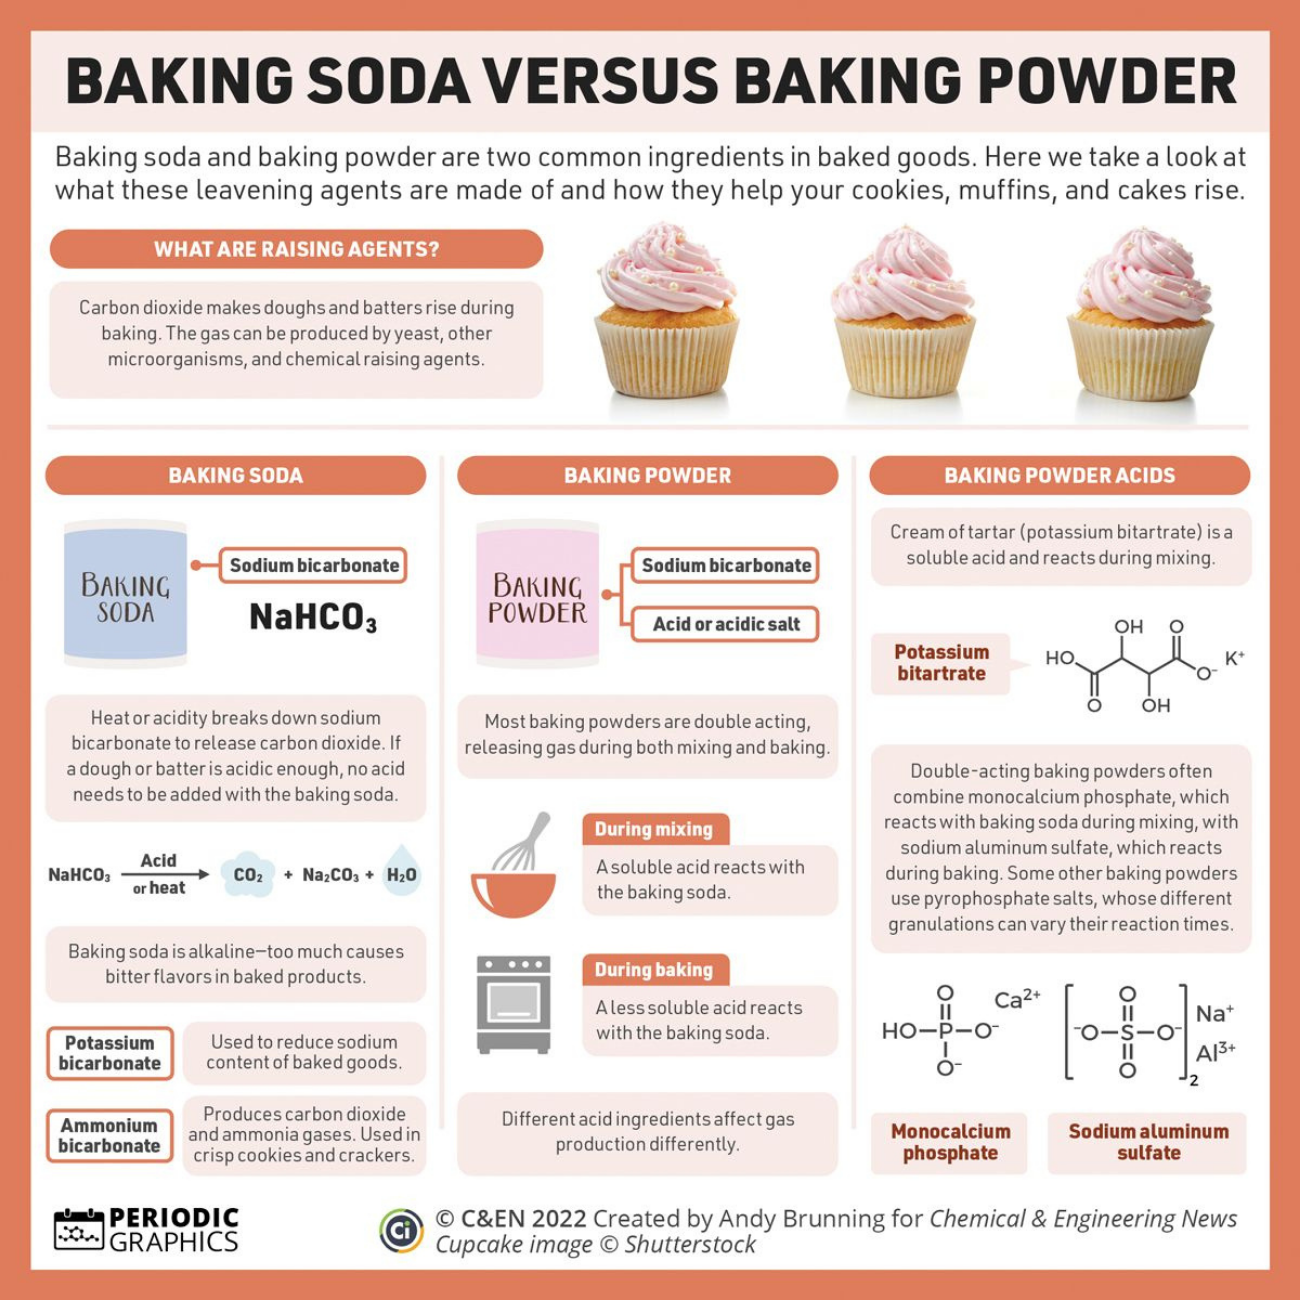 ICYMI: What’s the difference between baking soda and baking powder?